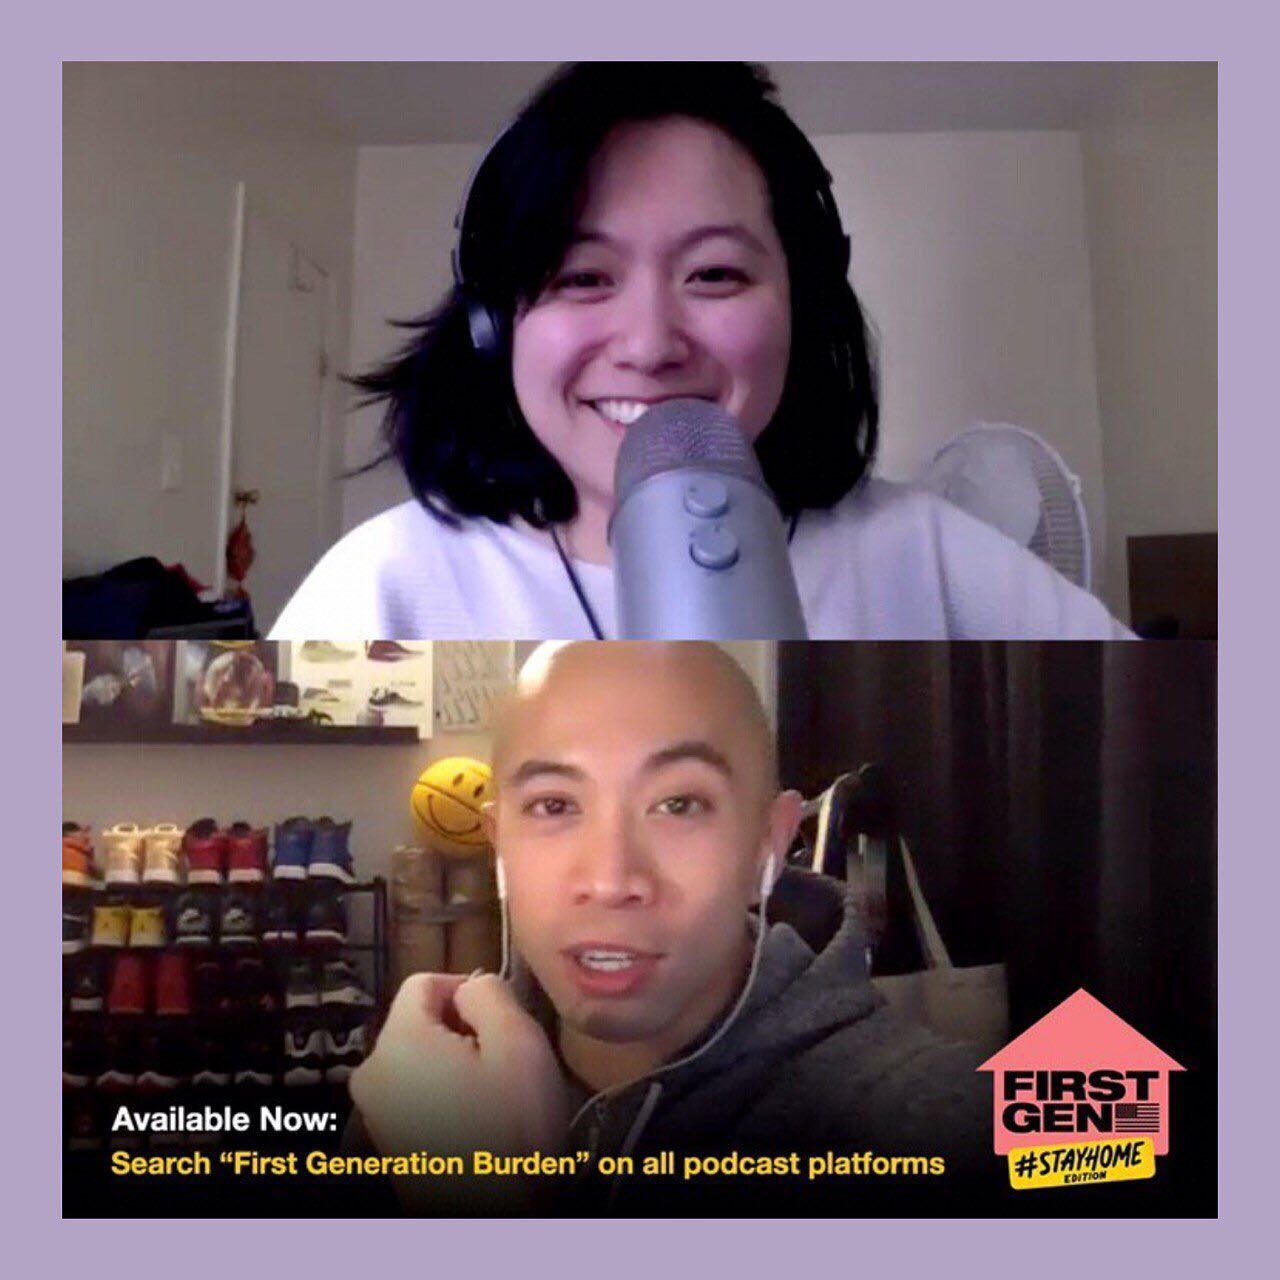 Crossposted from the hit podcast @firstgenburden created and hosted by @rich_tu . We recorded this episode when New York City was first ordered to shelter-in-place back in late March. We talk about anti-Asian sentiments across the country, the percep